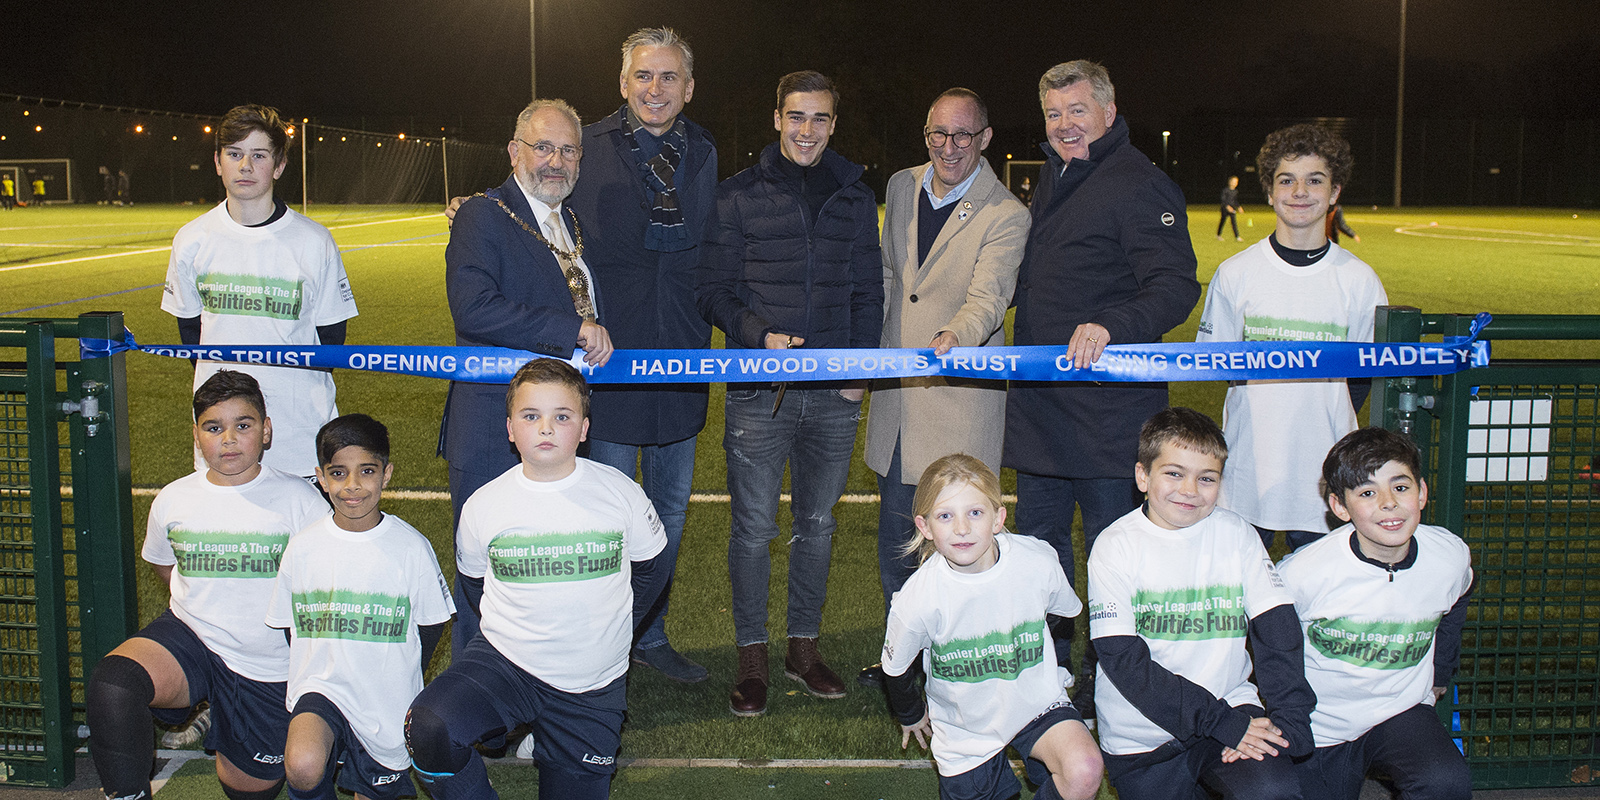 Geoff Shreeves, Harry Winks and Alan Smith unveil the brand new all-weather pitch at Hadley Wood